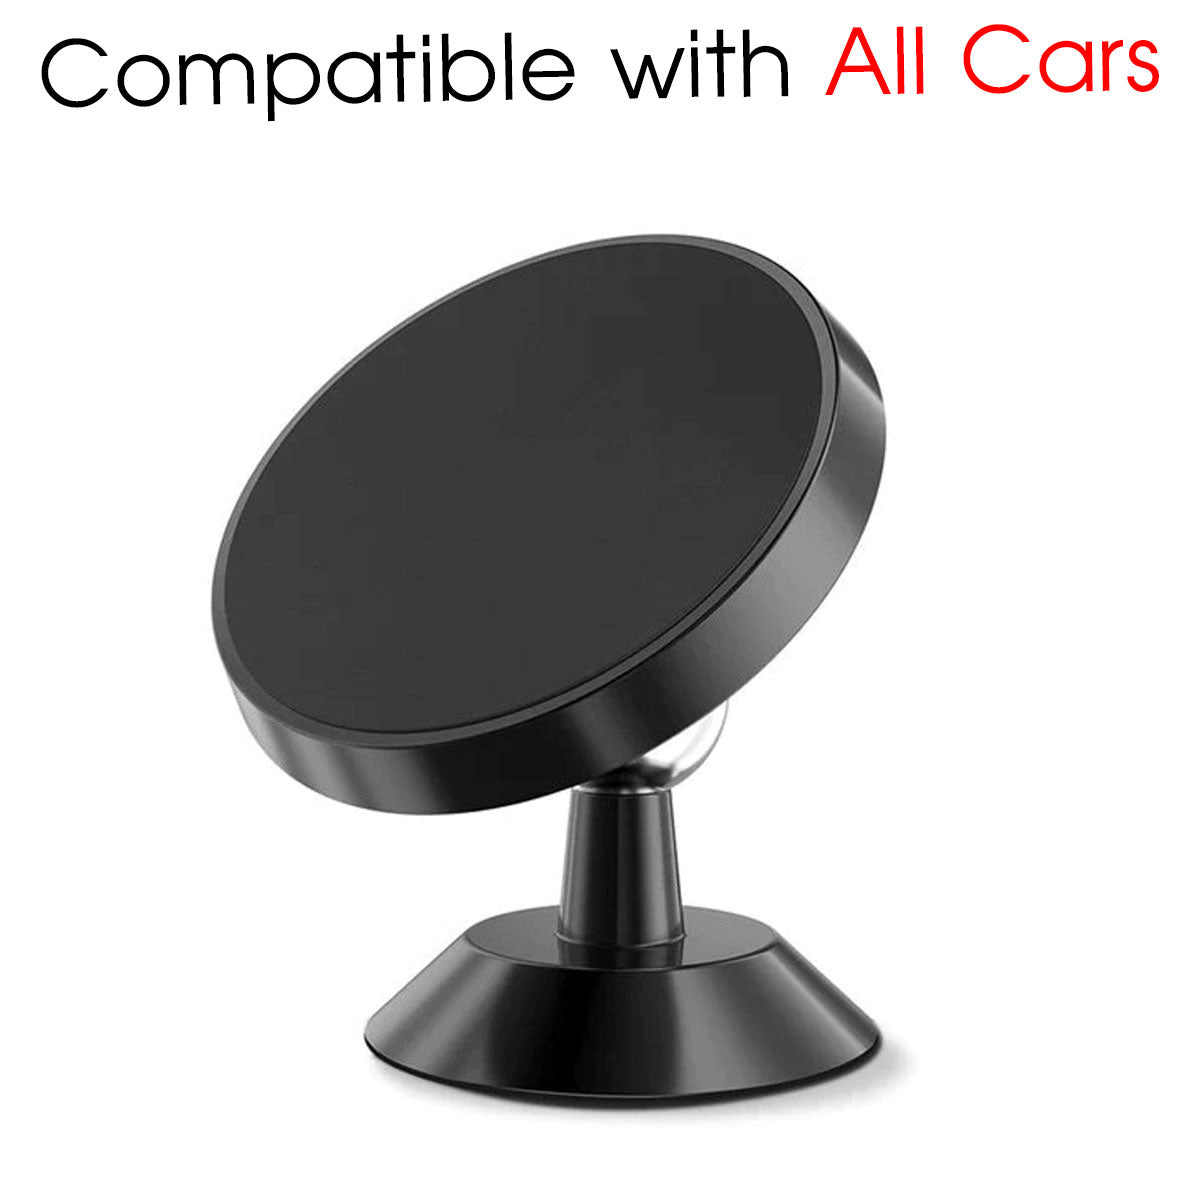 [2 Pack ] Magnetic Phone Mount, Custom For Your Cars, [ Super Strong Magnet ] [ with 4 Metal Plate ] car Magnetic Phone Holder, [ 360° Rotation ] Universal Dashboard car Mount Fits All Cell Phones, Car Accessories CH13982